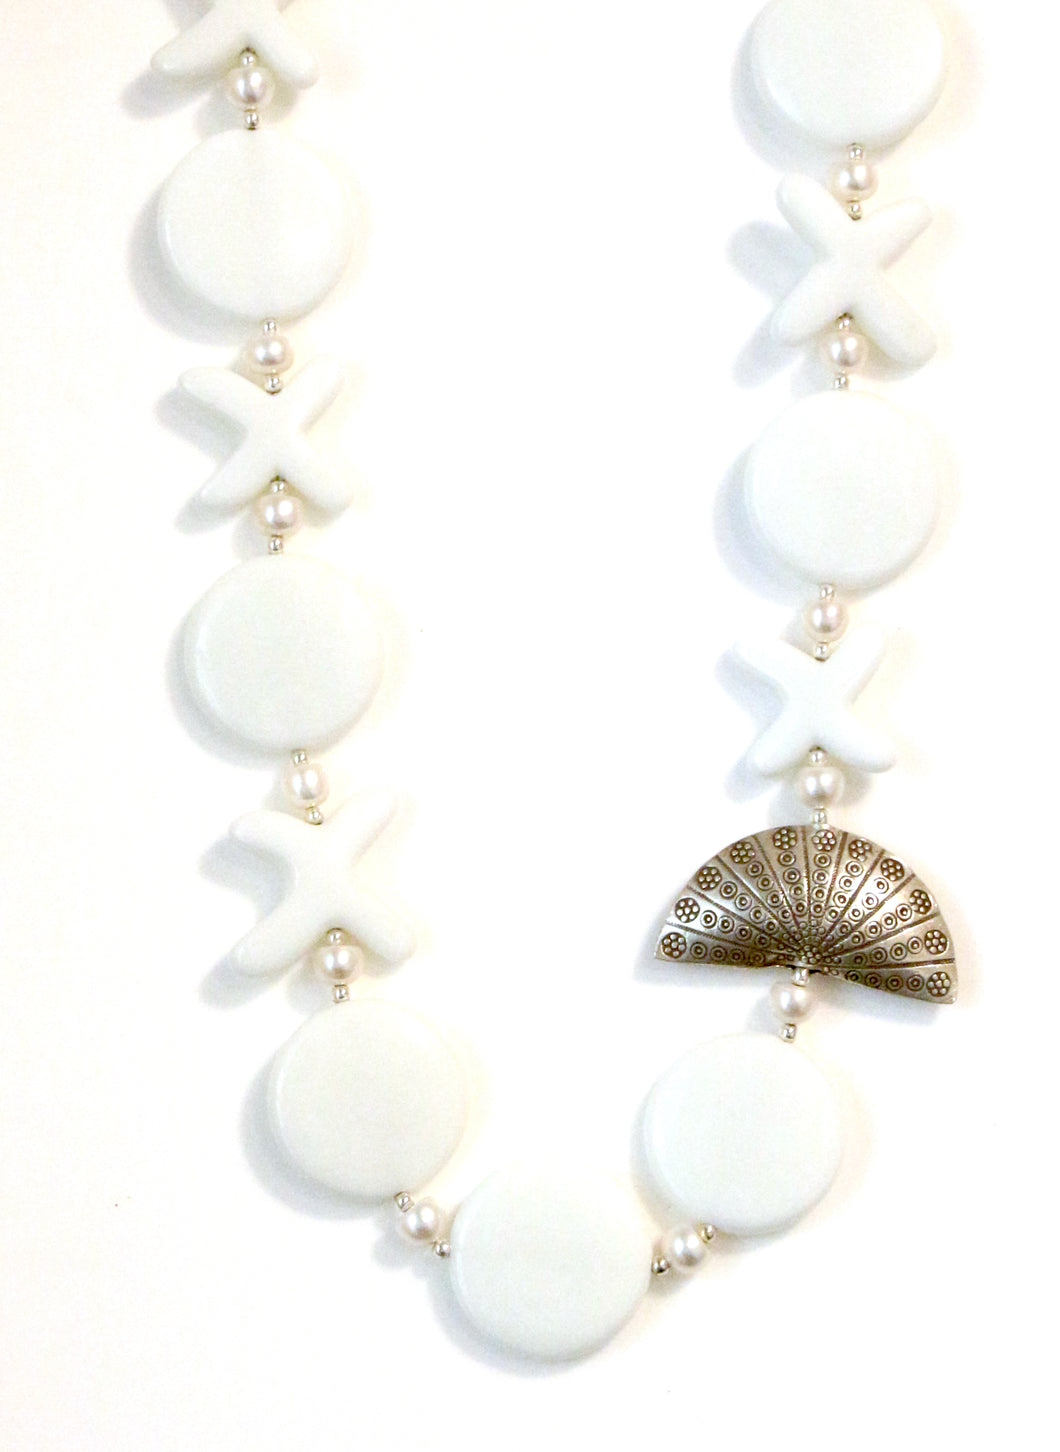 Australian Handmade White Agate and Pearl Necklace and Sterling Silver Fan